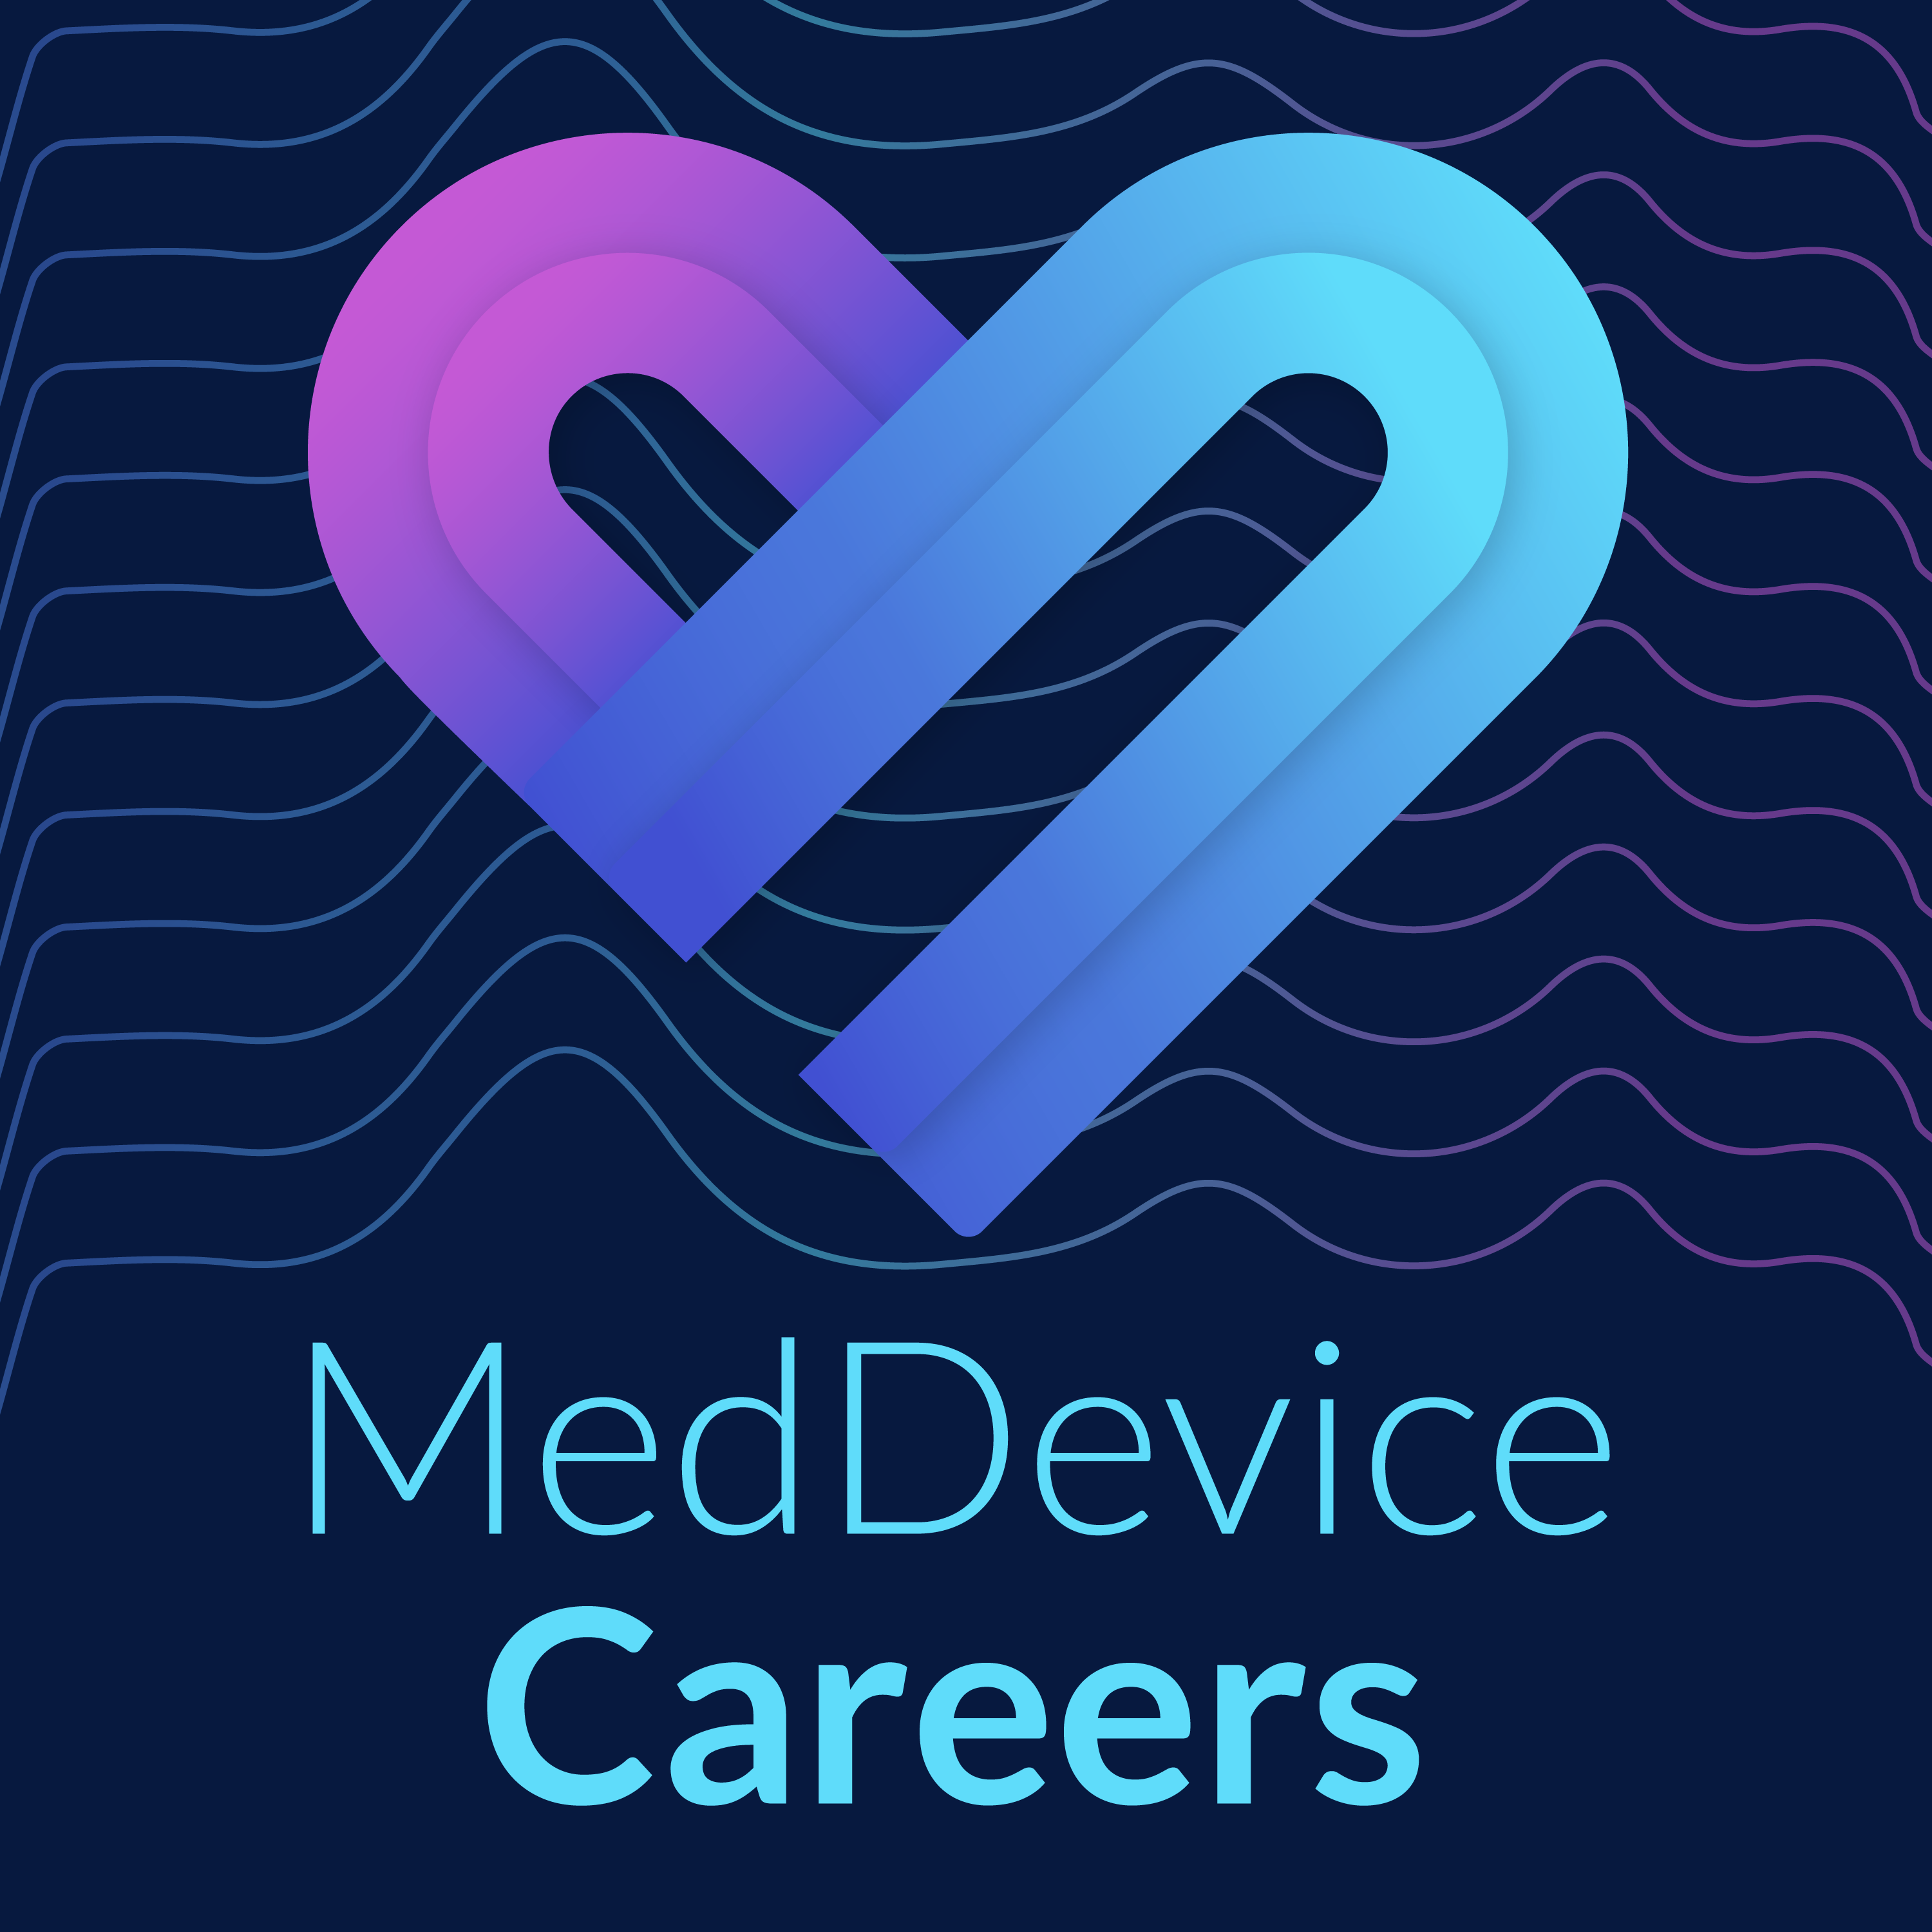 Med Device Careers